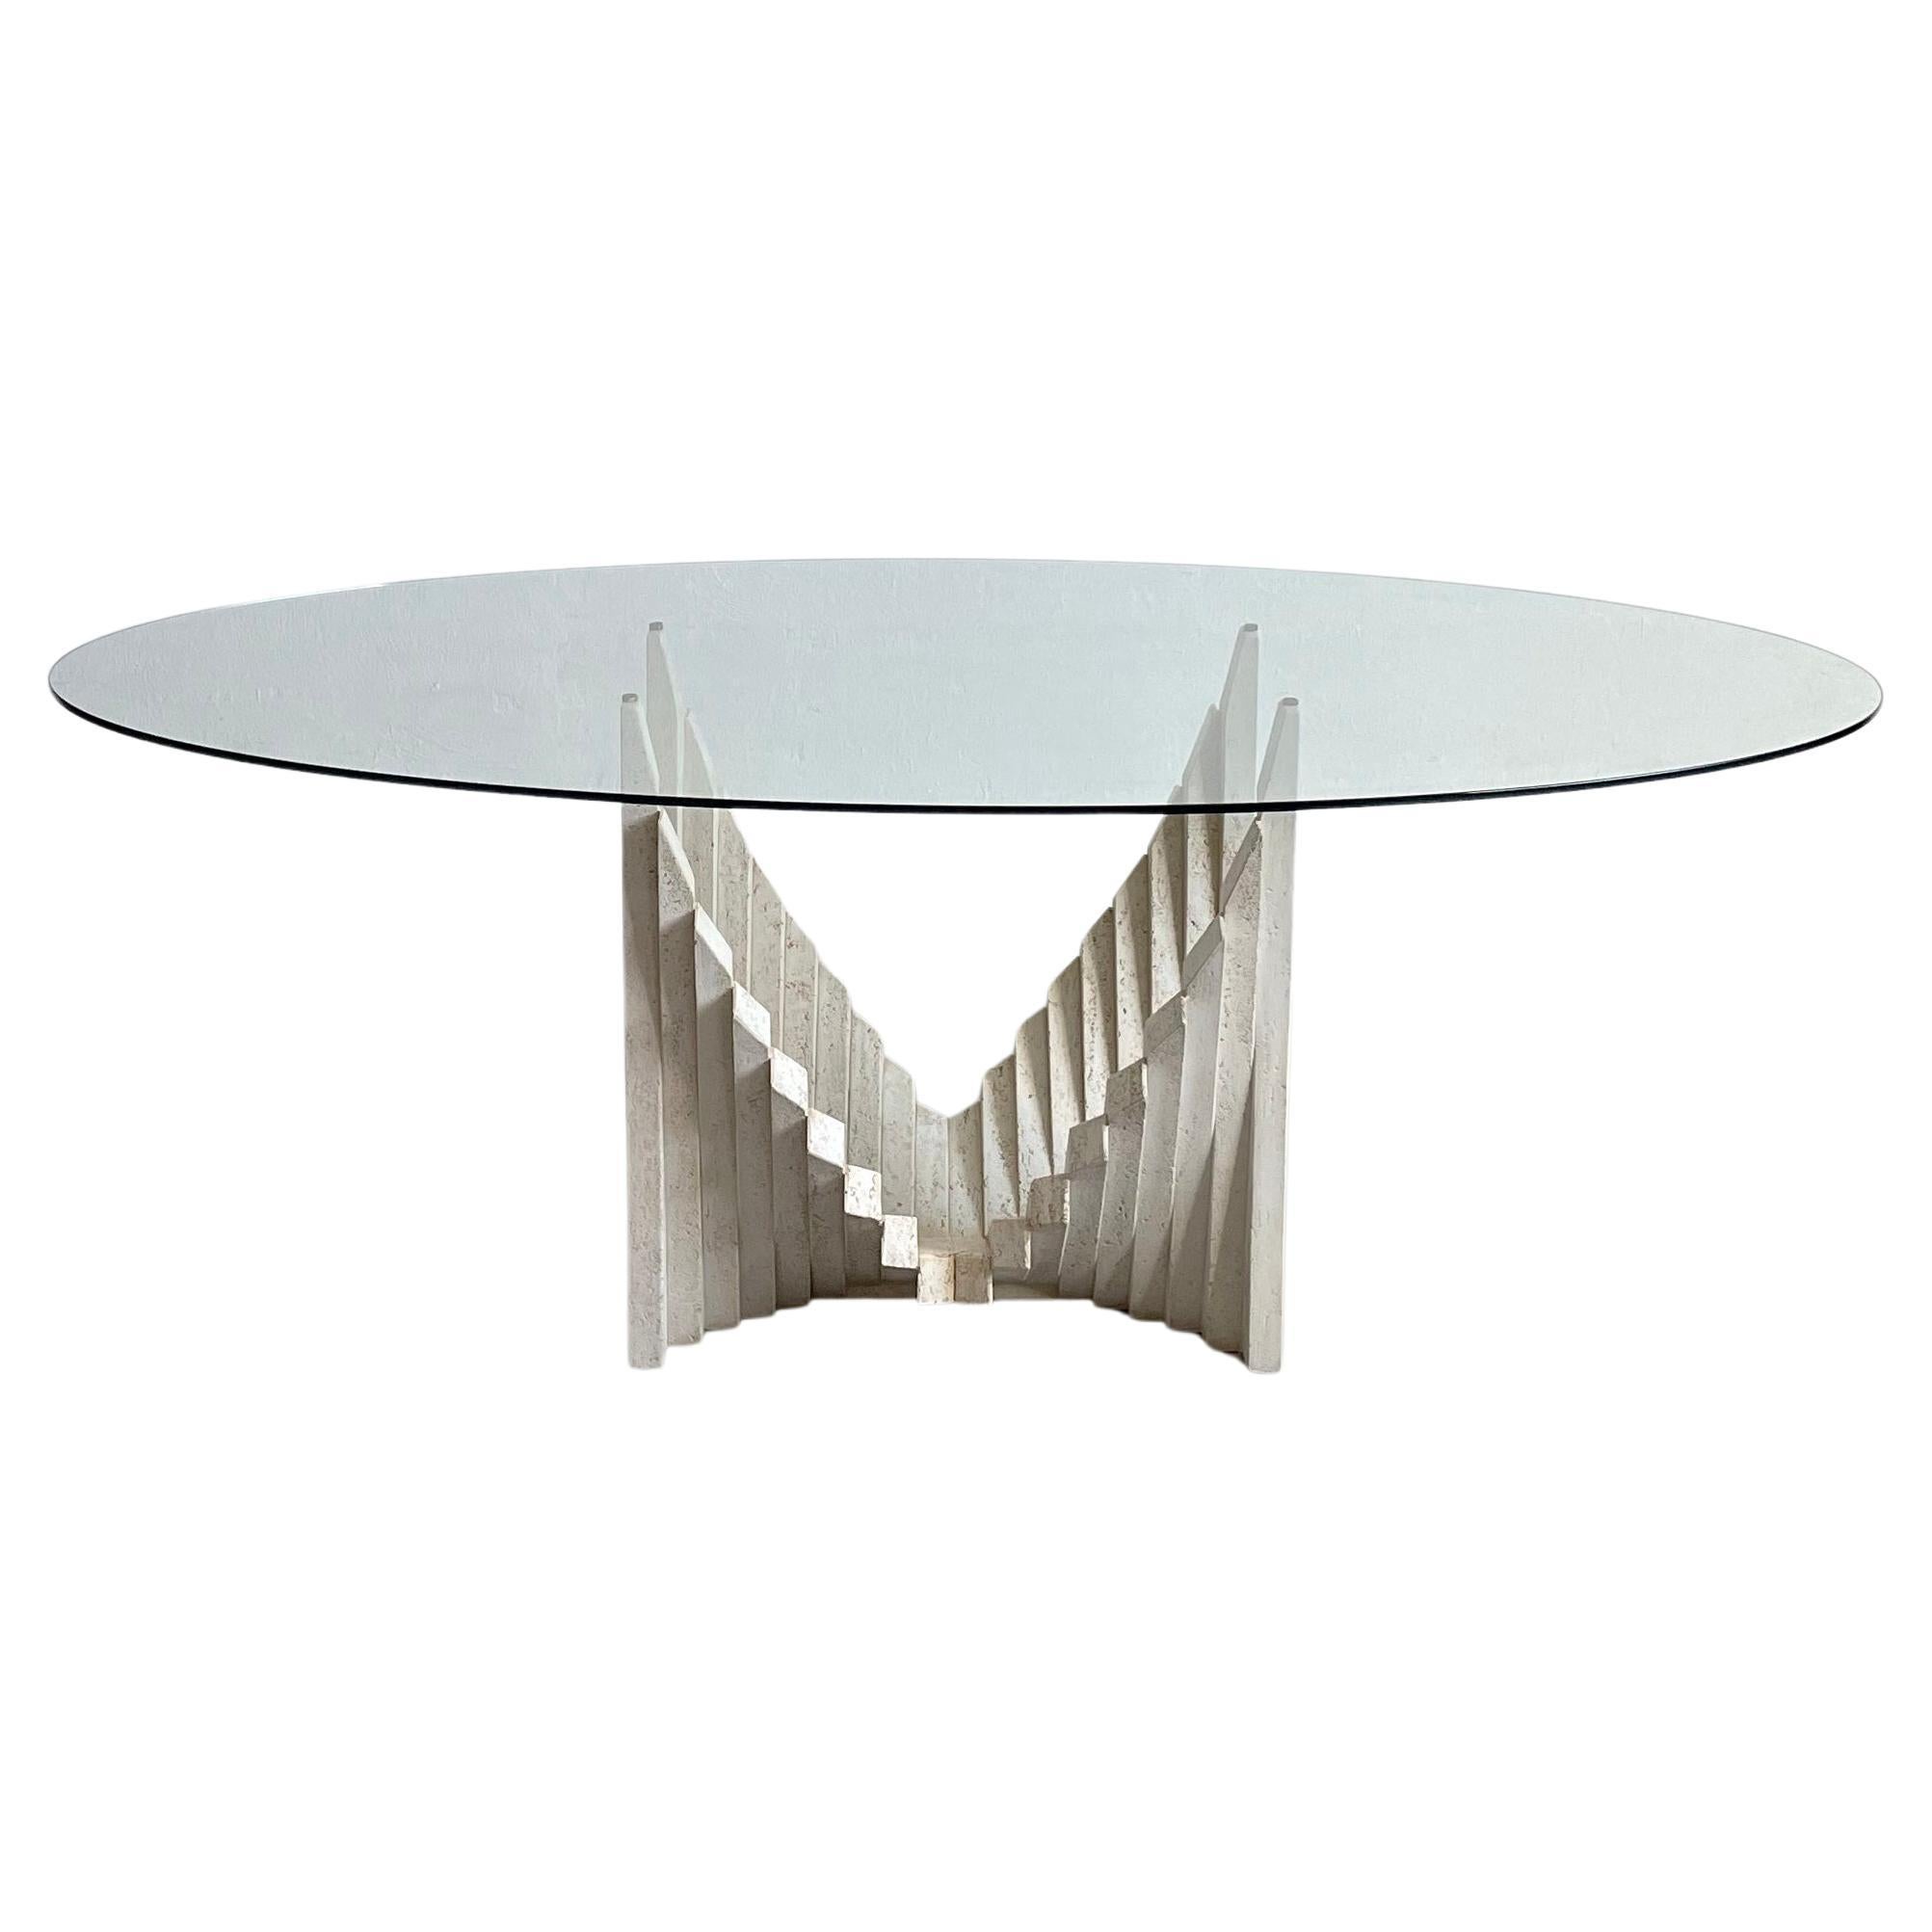 Sculptural Italian Brutalist Dining Table from the 1970s, Travertine and Glass